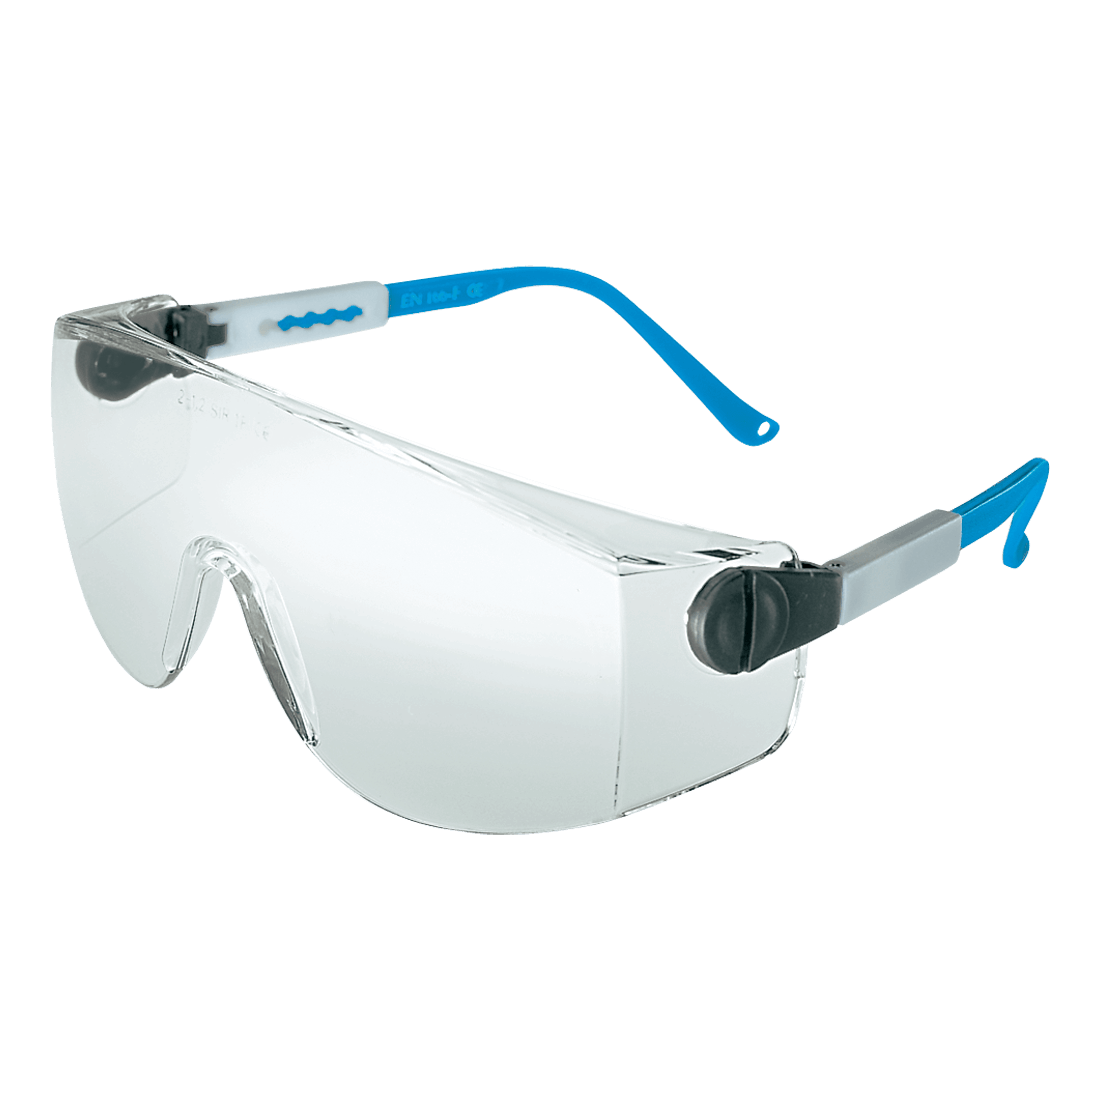 ACCIAIO SAFETY GLASSES CLEAR LENS